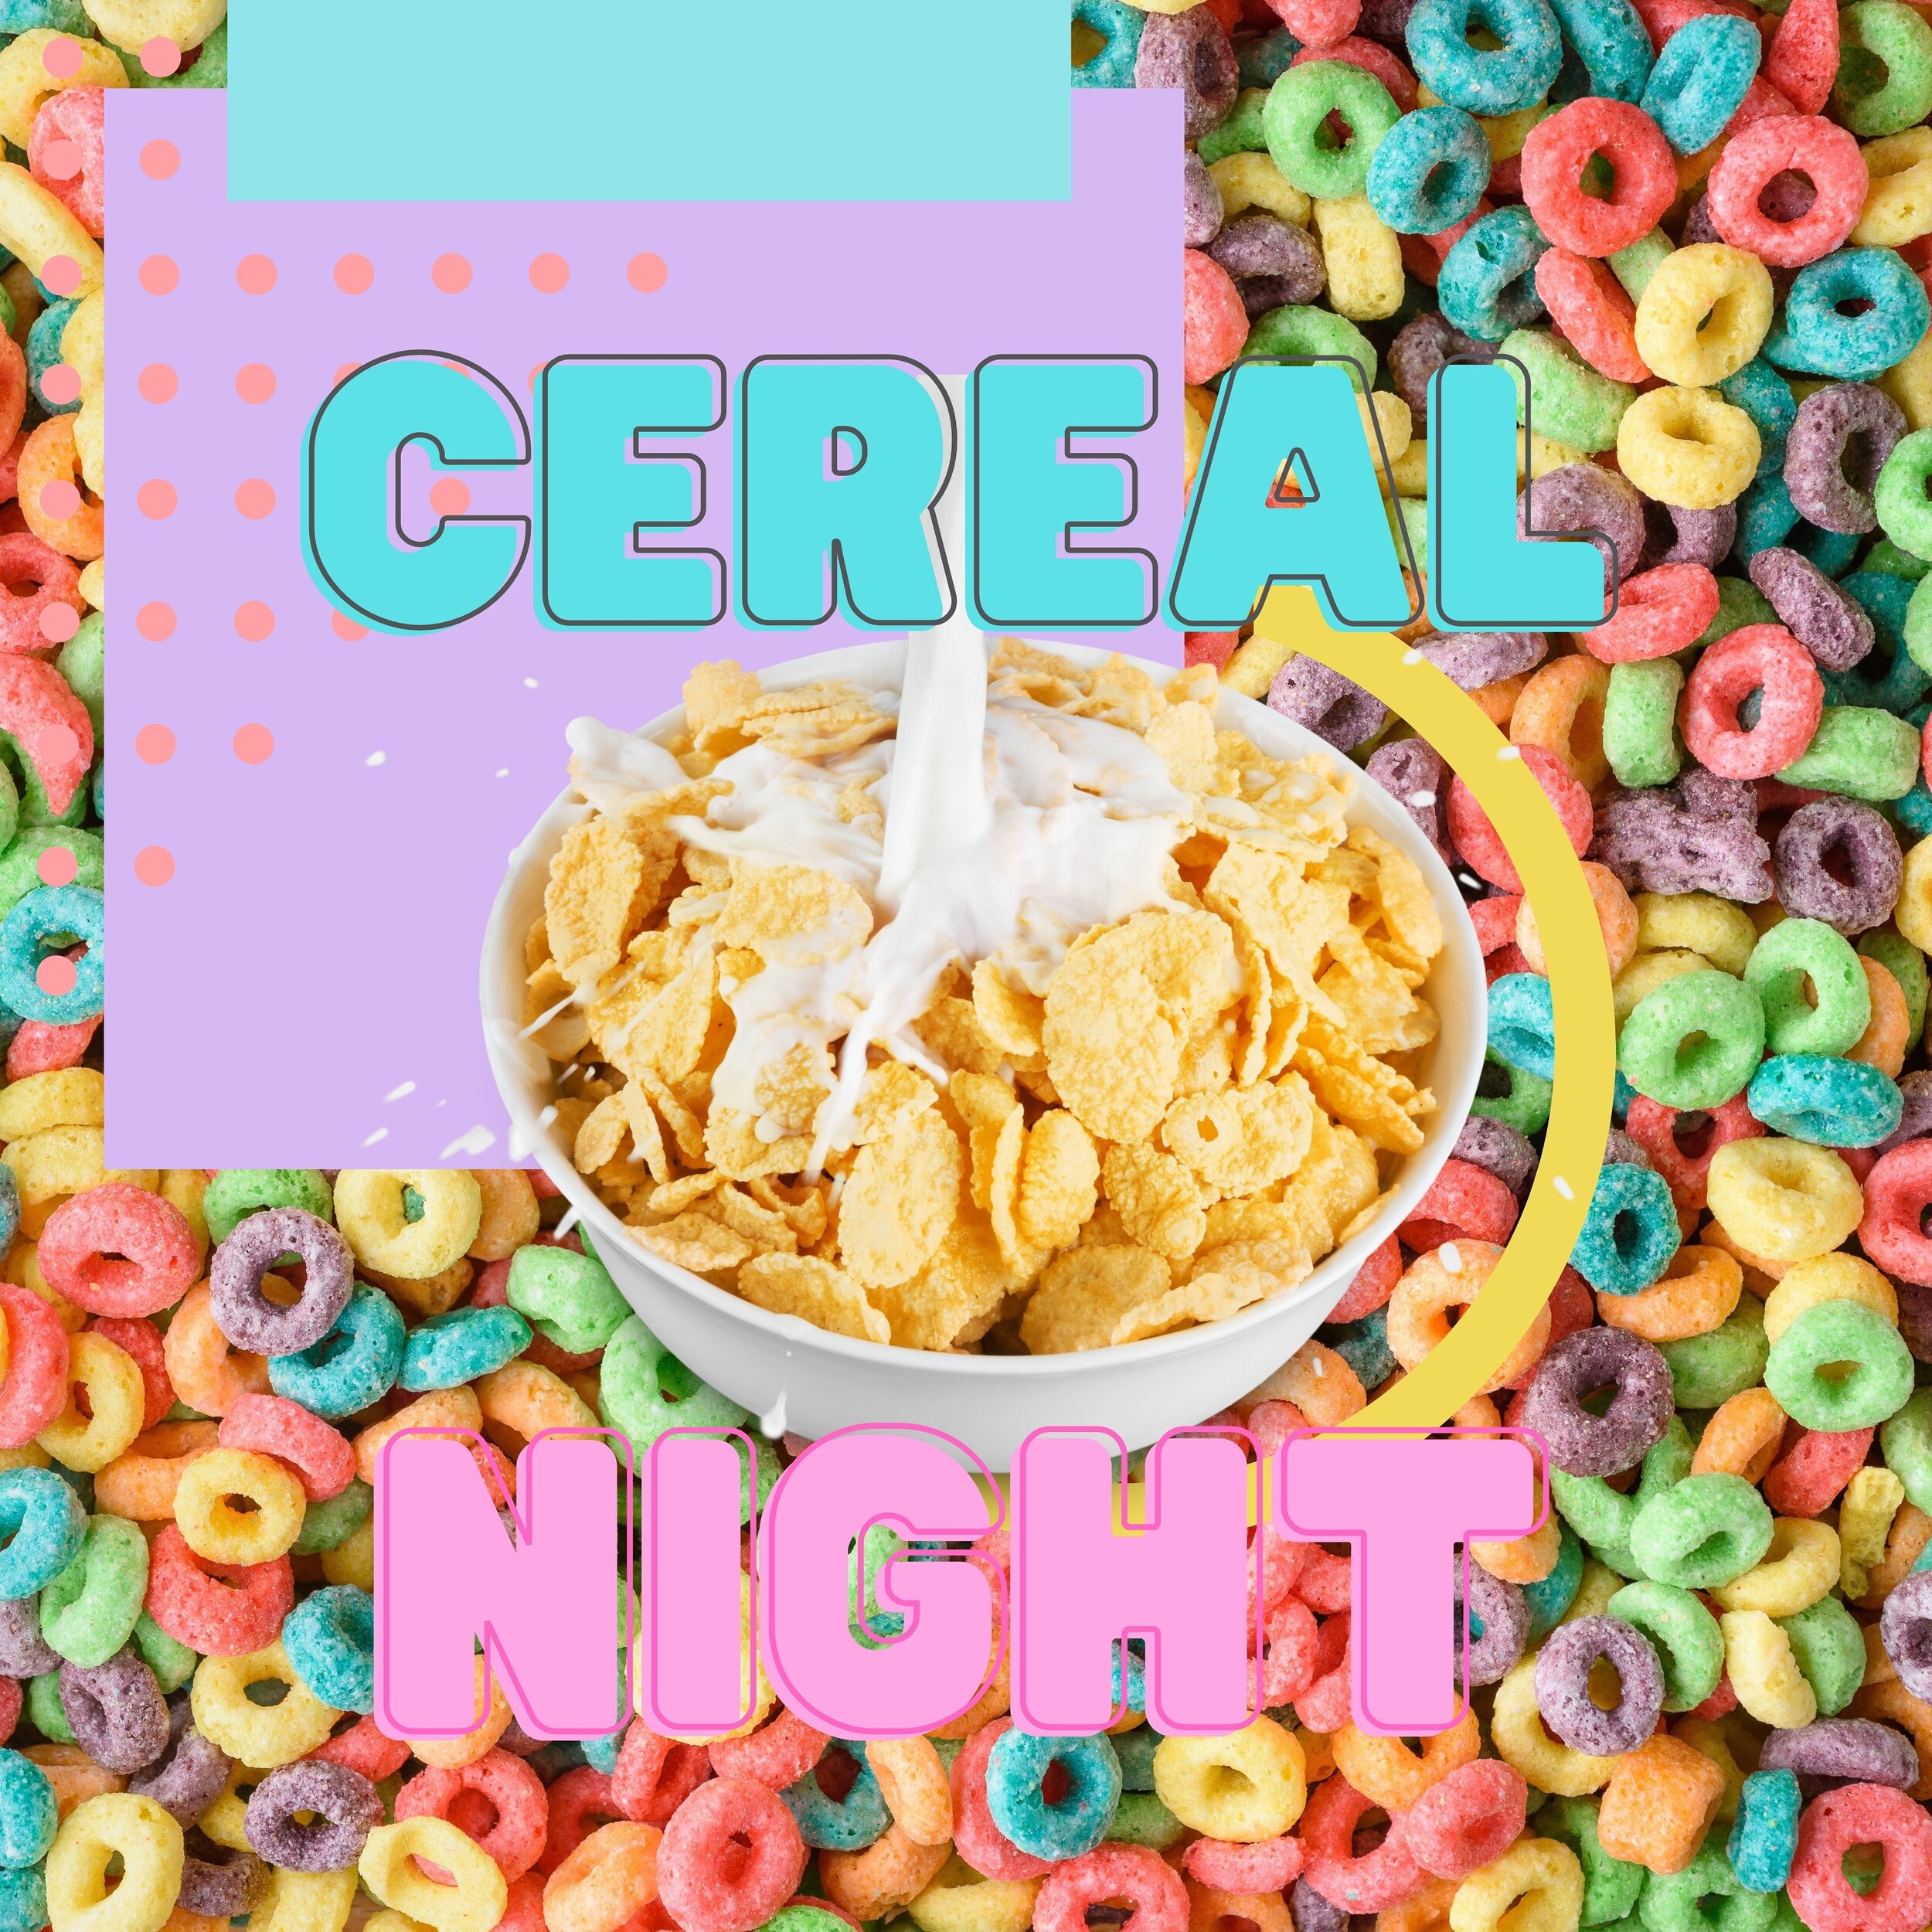 TONIGHT!!! 🥣

We wanna know, what is the 🐐 cereal? Let us know below! 👇